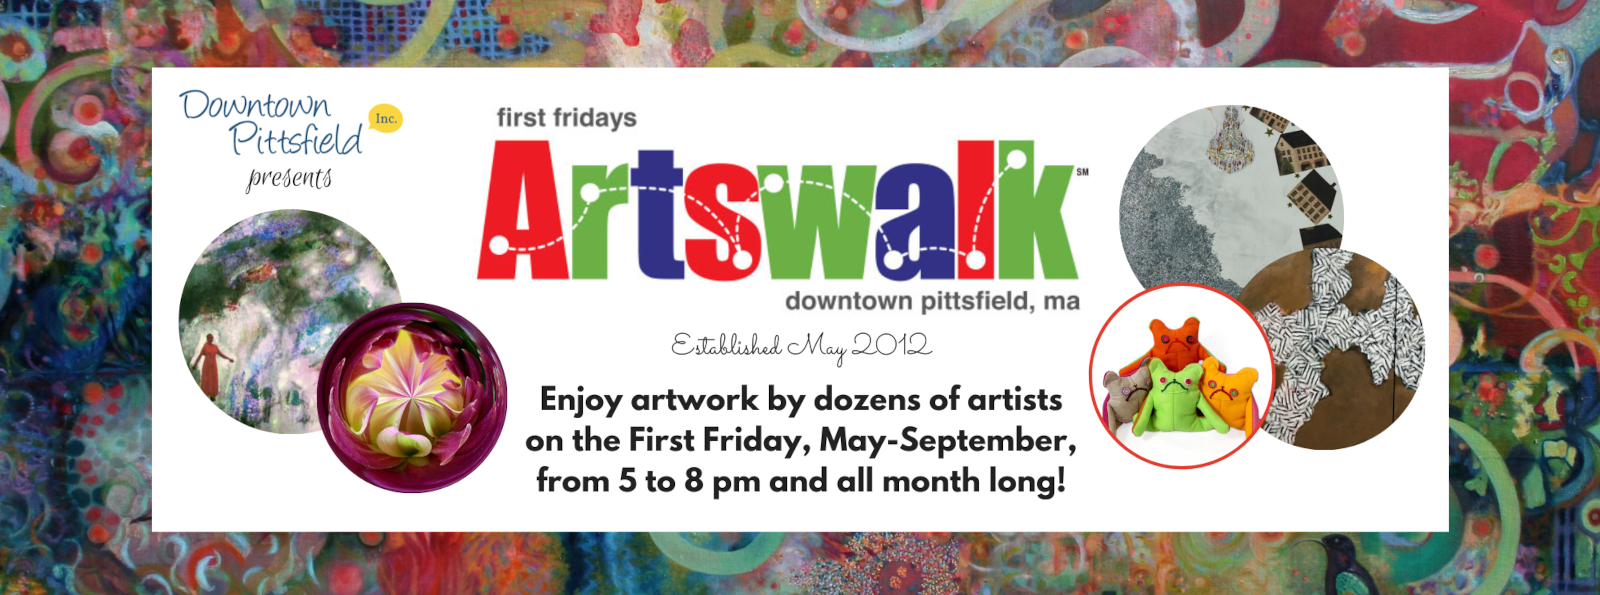 First Fridays Artswalk in Downtown Pittsfield, MA